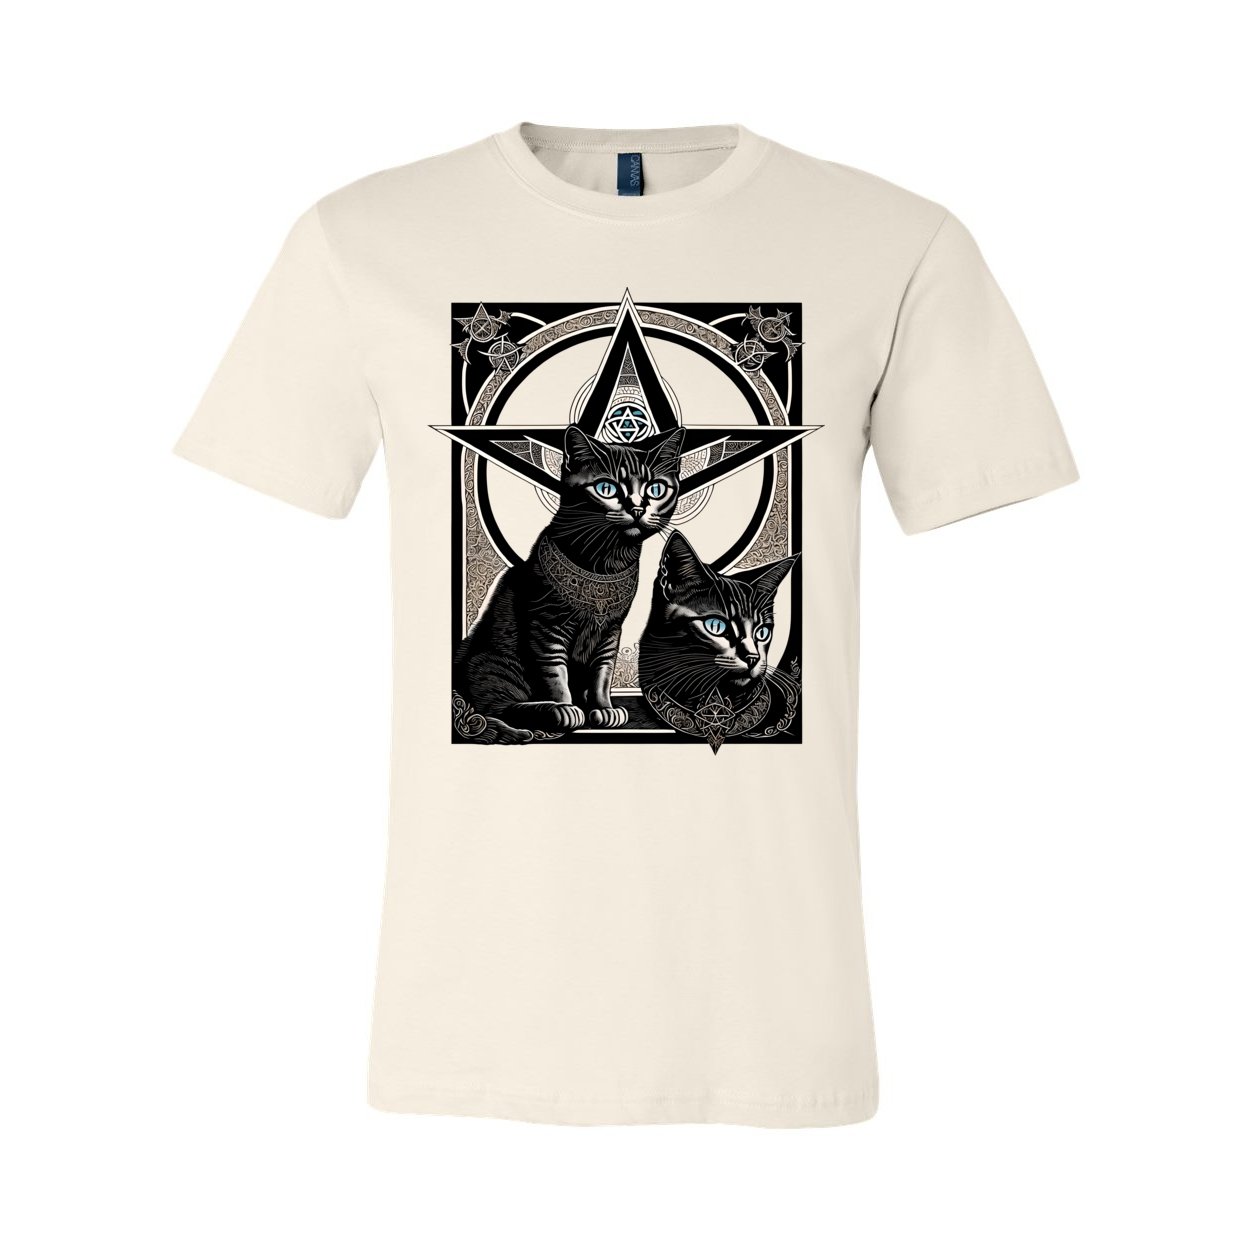 Pagan & Wiccan Kittens | Magical Druid Cats | Nature Spirituality, Earth and Sky | Pet Lover Wisdom Healing Graphic Art T-Shirt - Sacred Surreal